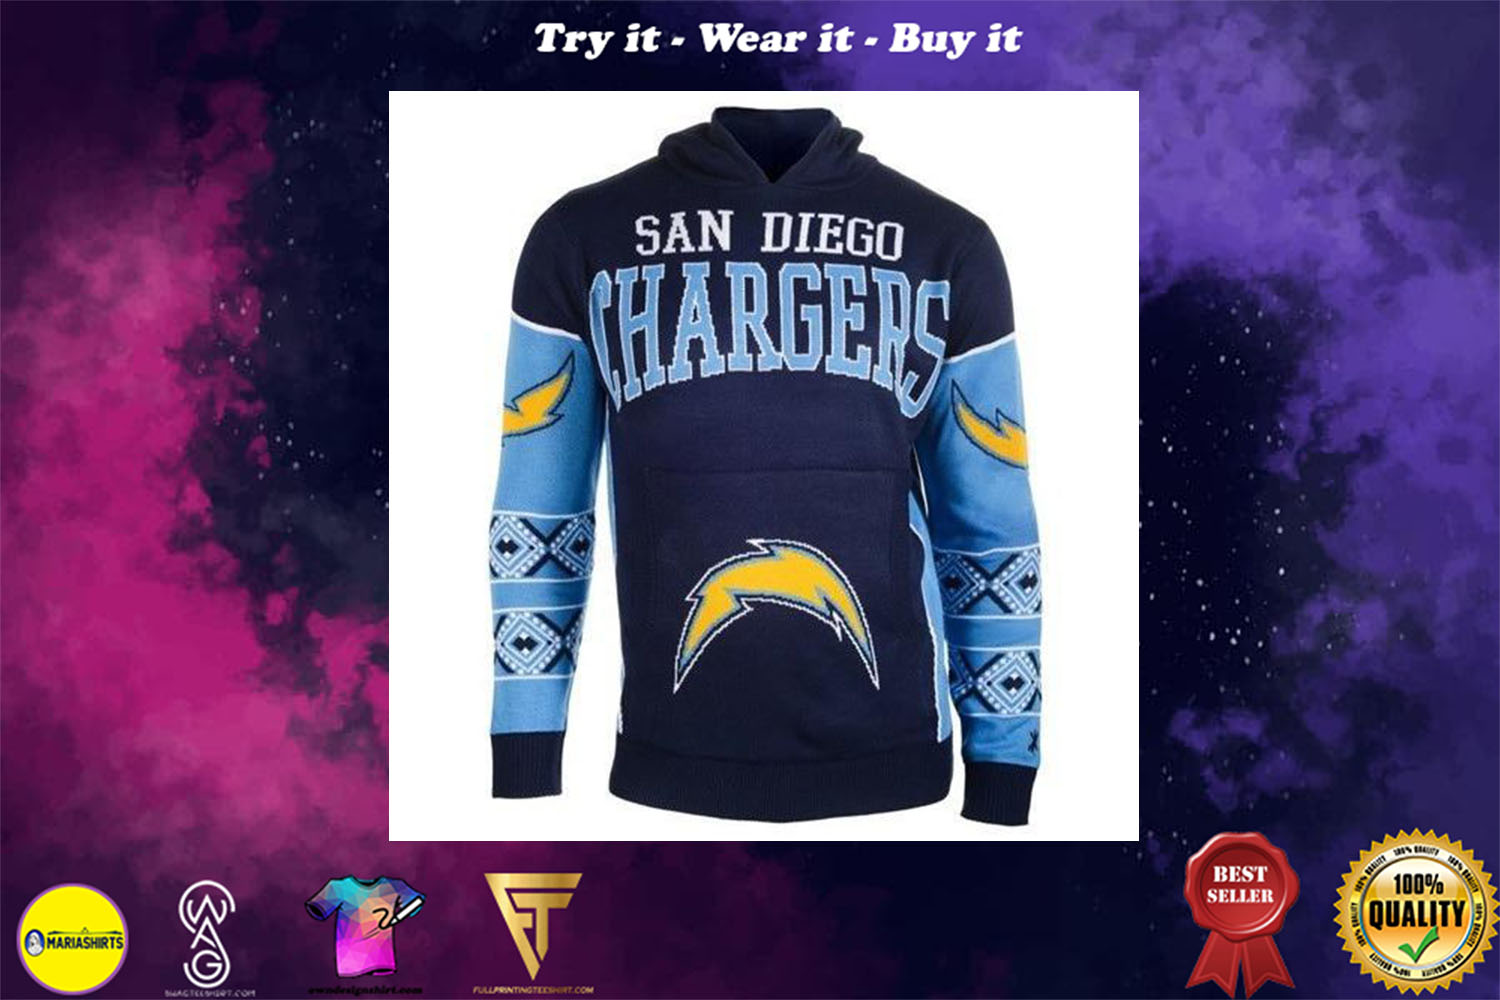 the san diego chargers full over print shirt